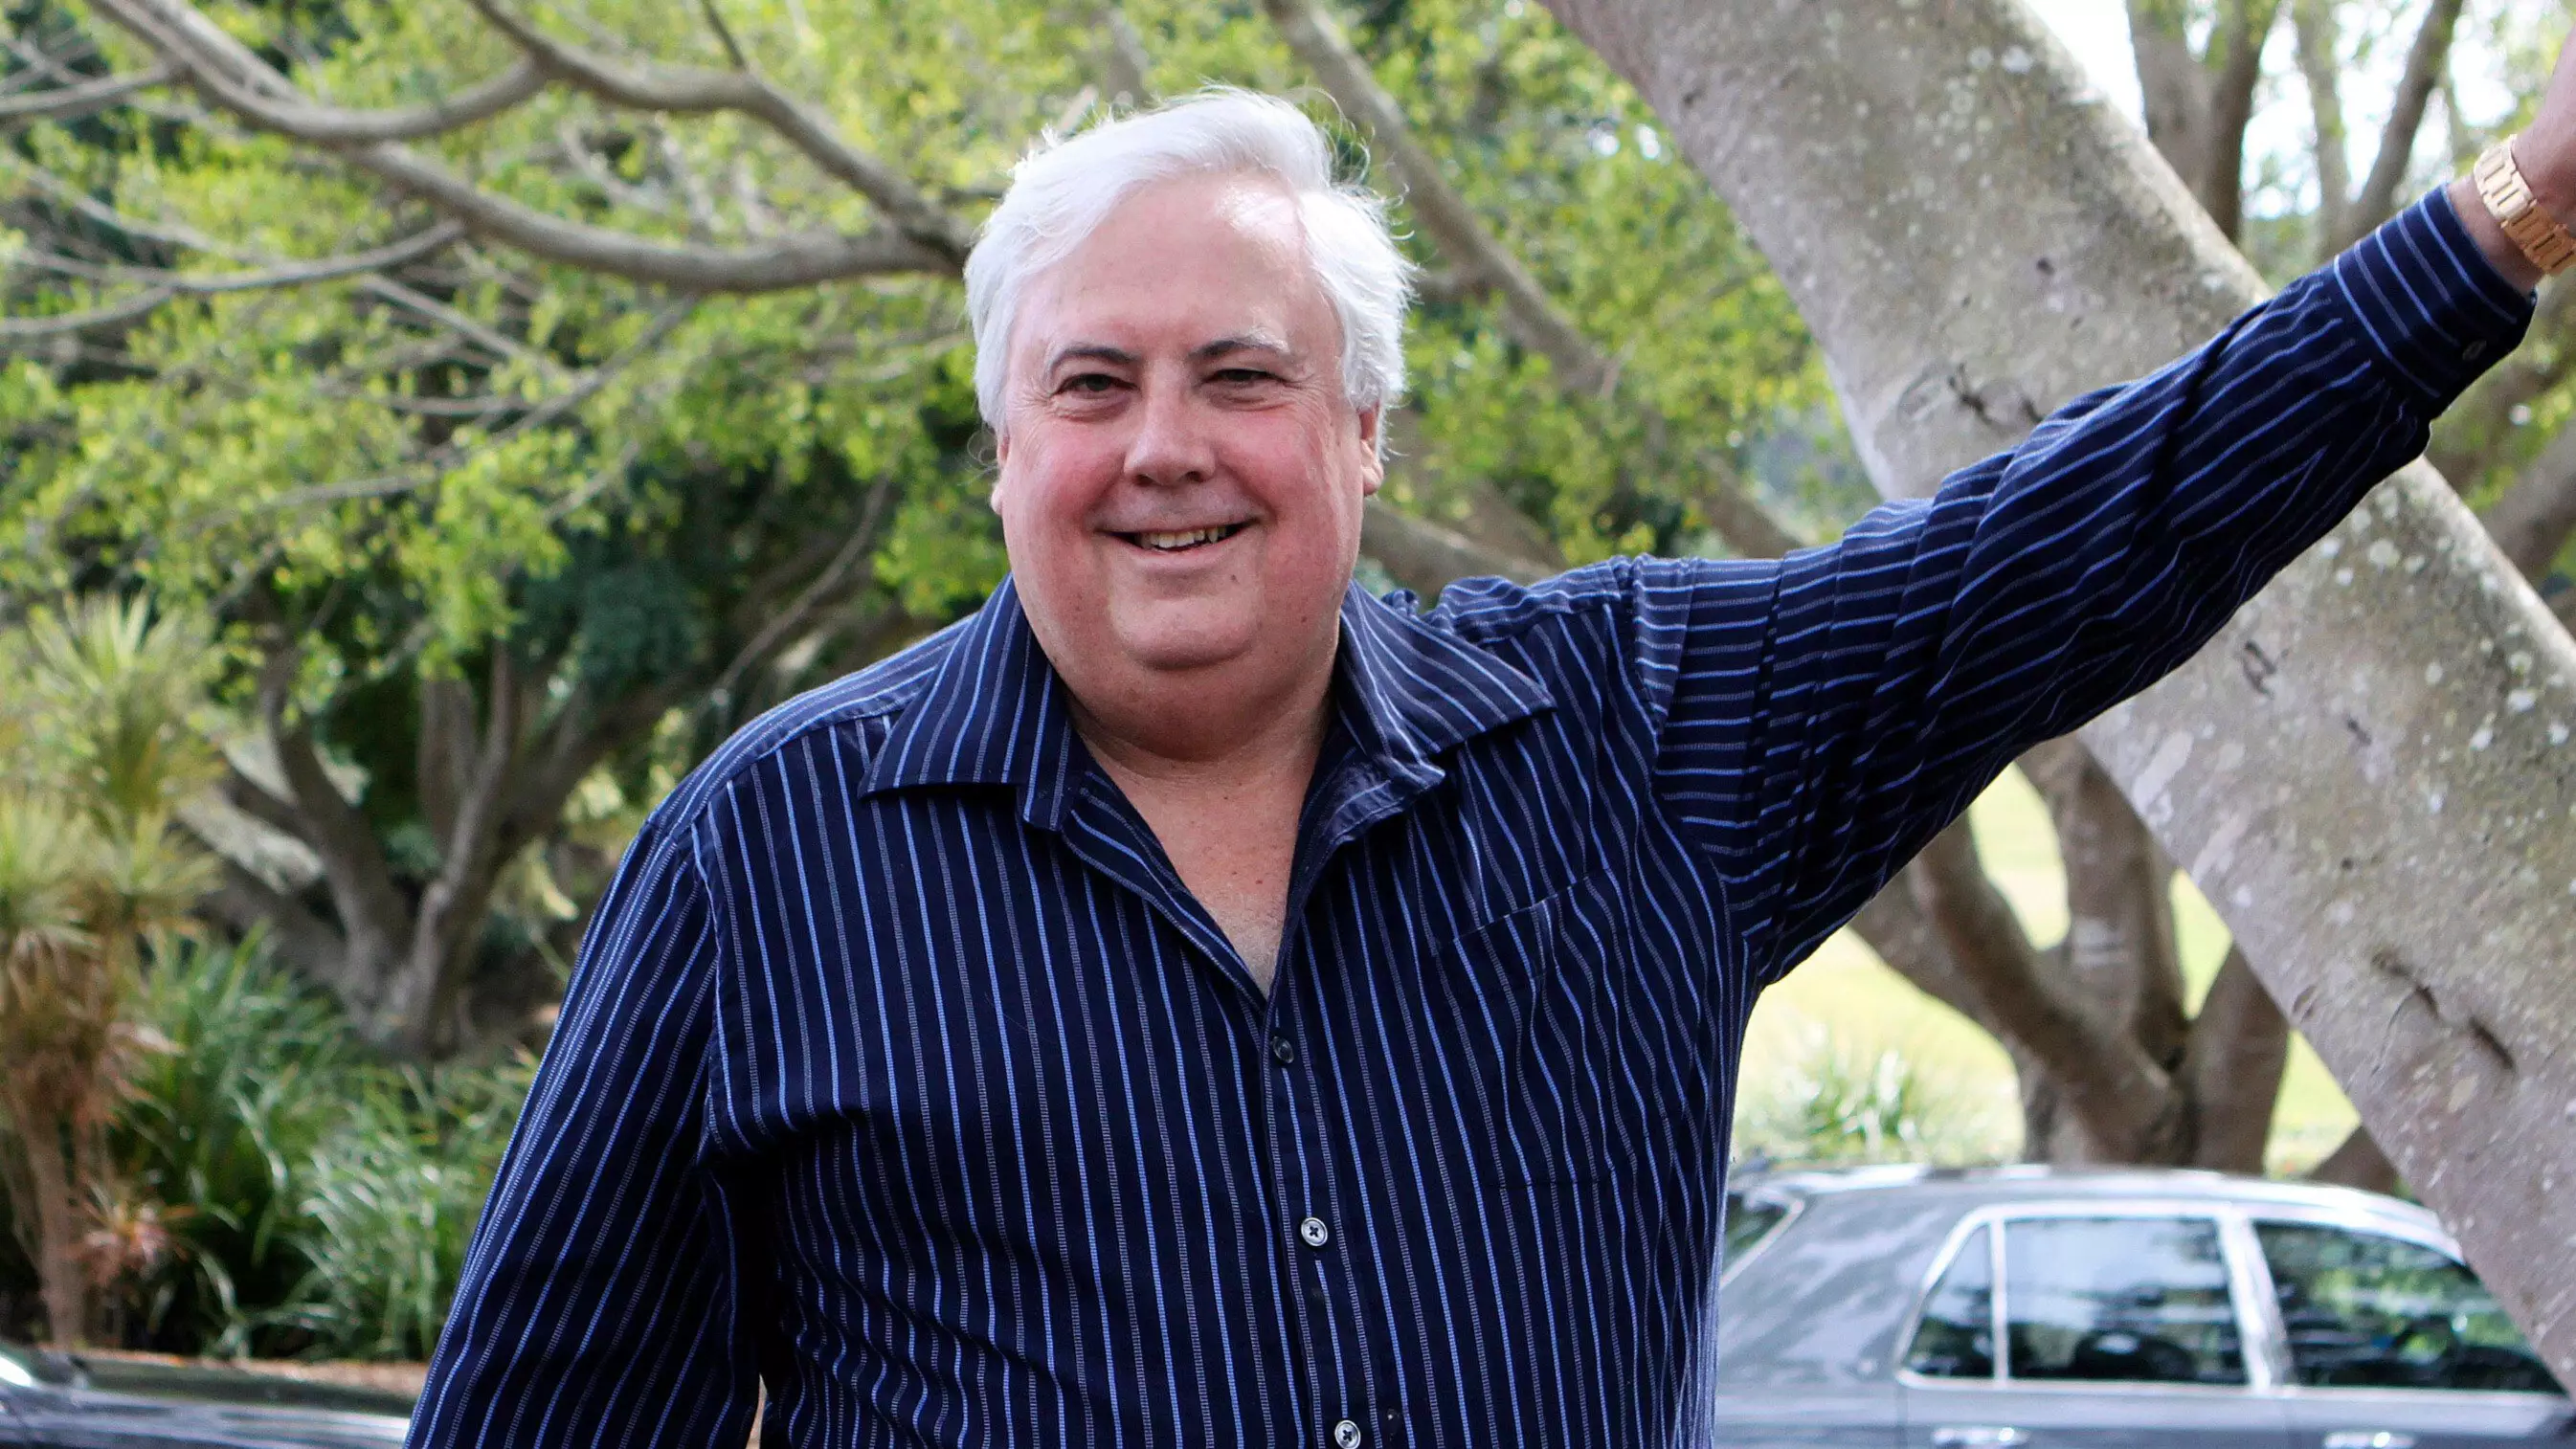 Aussie Newspaper Savages Clive Palmer By Turning Him Into Jabba The Hut